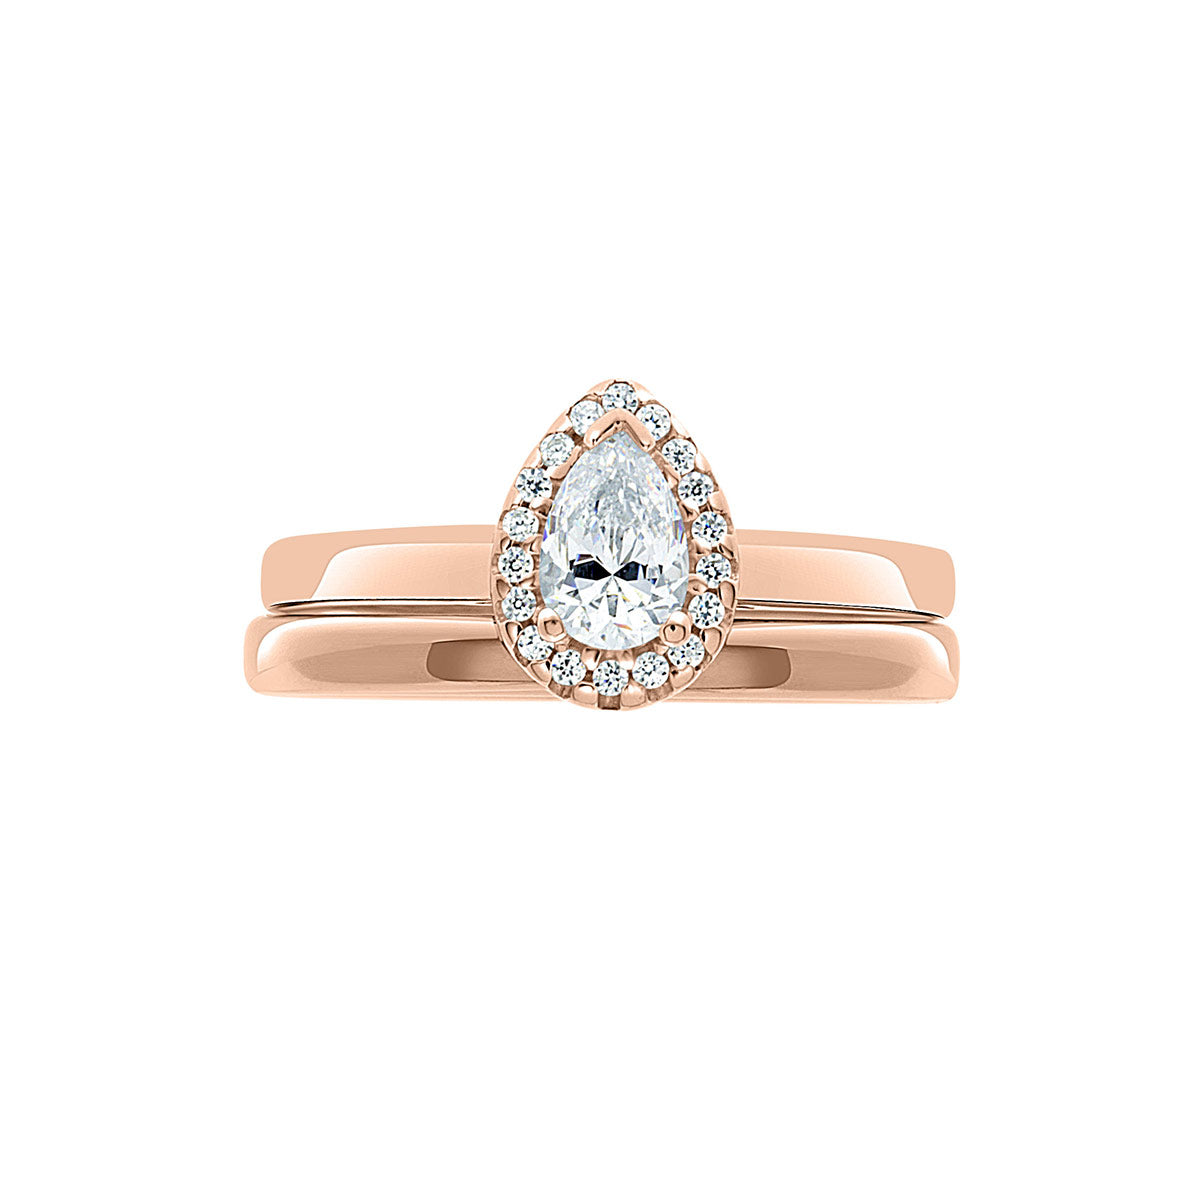 Vintage Engagement Ring with Pear Shape Diamond in rose gold with a matching rose gold plain wedding band